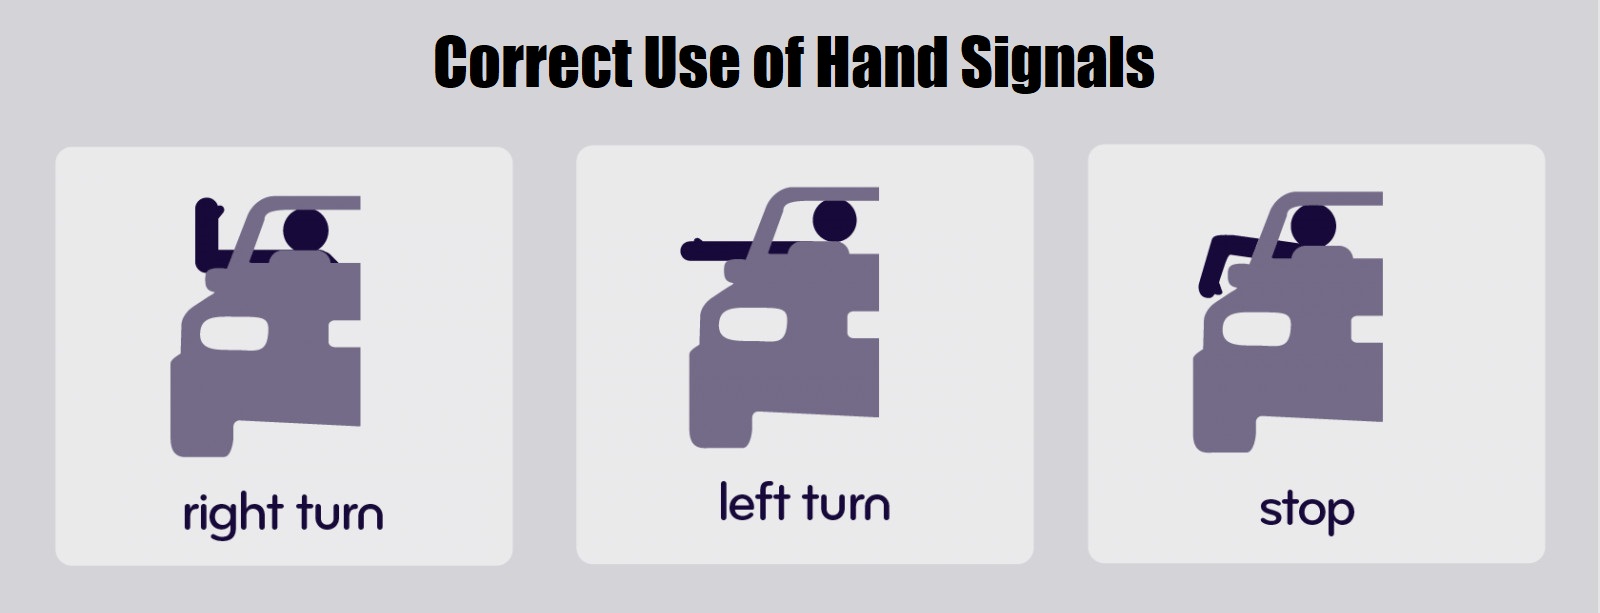 Use hand signals to make left turn on highway